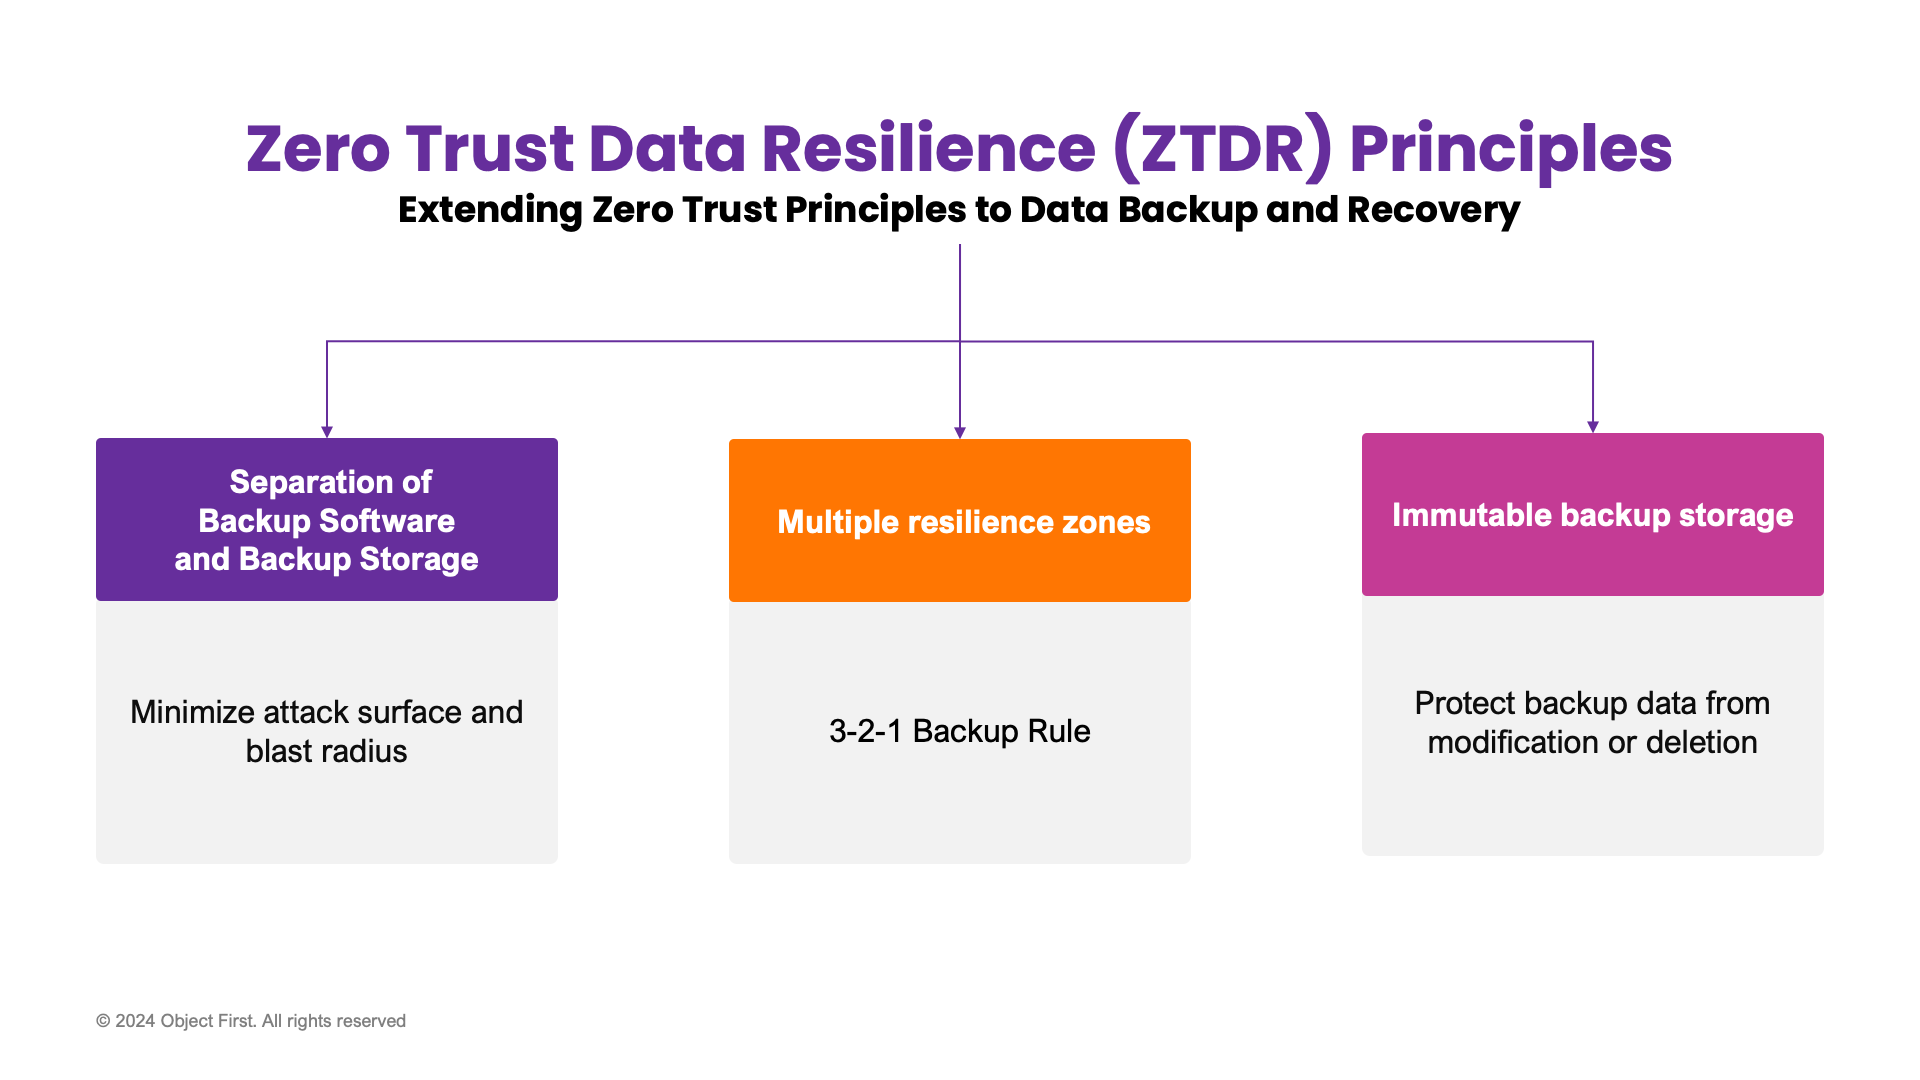 Flowchart of Object First's Zero Trust Data Resilience (ZTDR) Principles extending Zero Trust to Data Backup and Recovery, emphasizing Separation of Backup Software and Backup Storage, Multiple resilience zones, and Immutable backup storage for data protection.